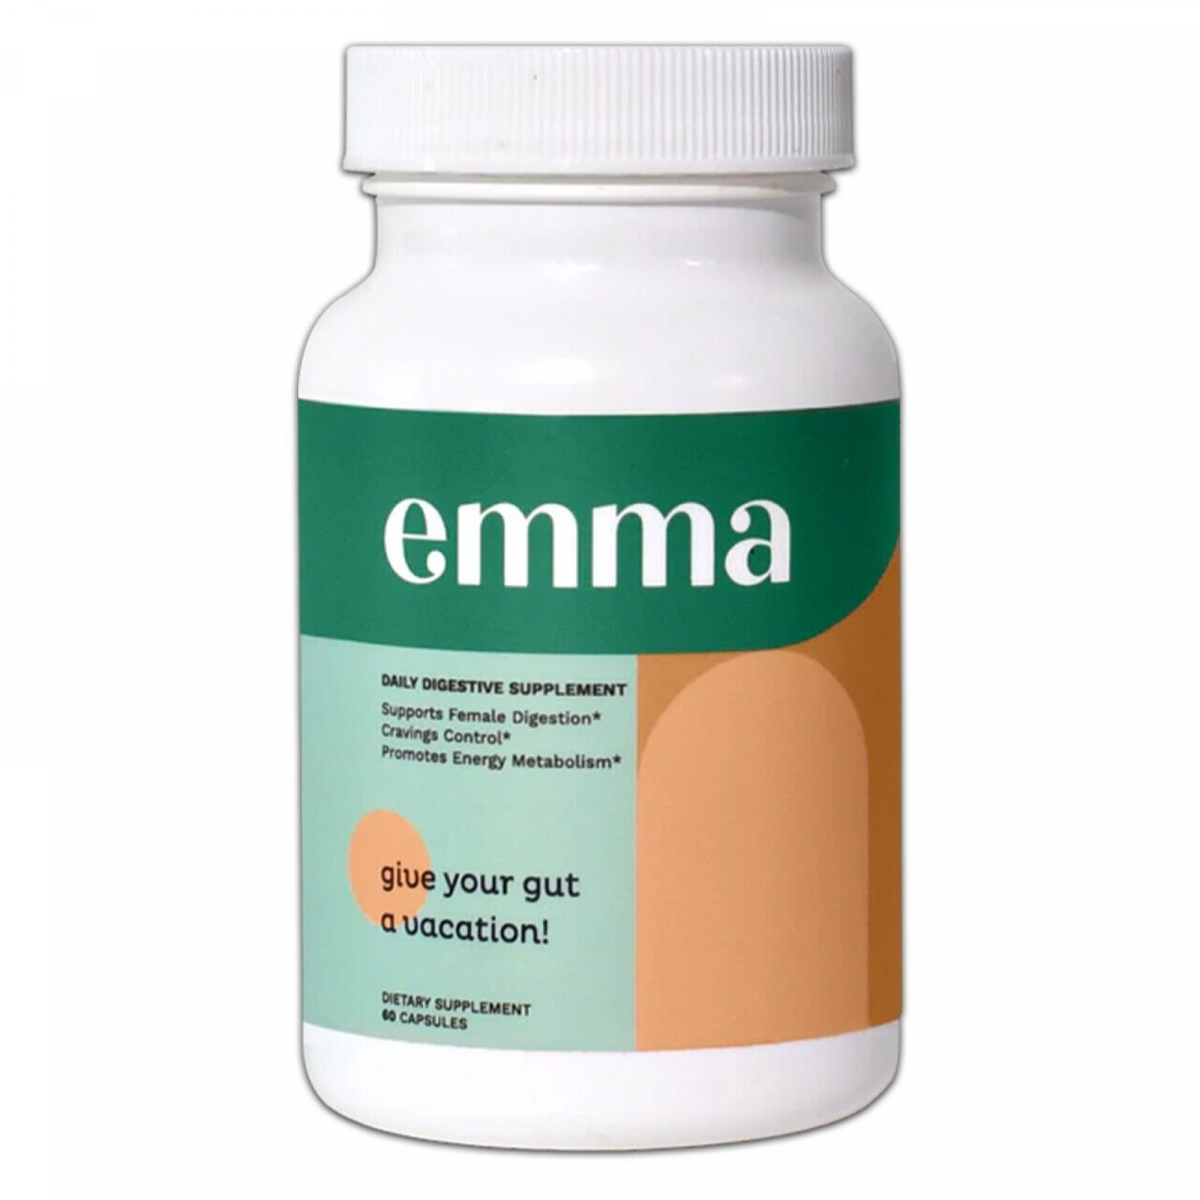 Emma for gut health: Price, Benefits, Ingredients, side effects, Review?